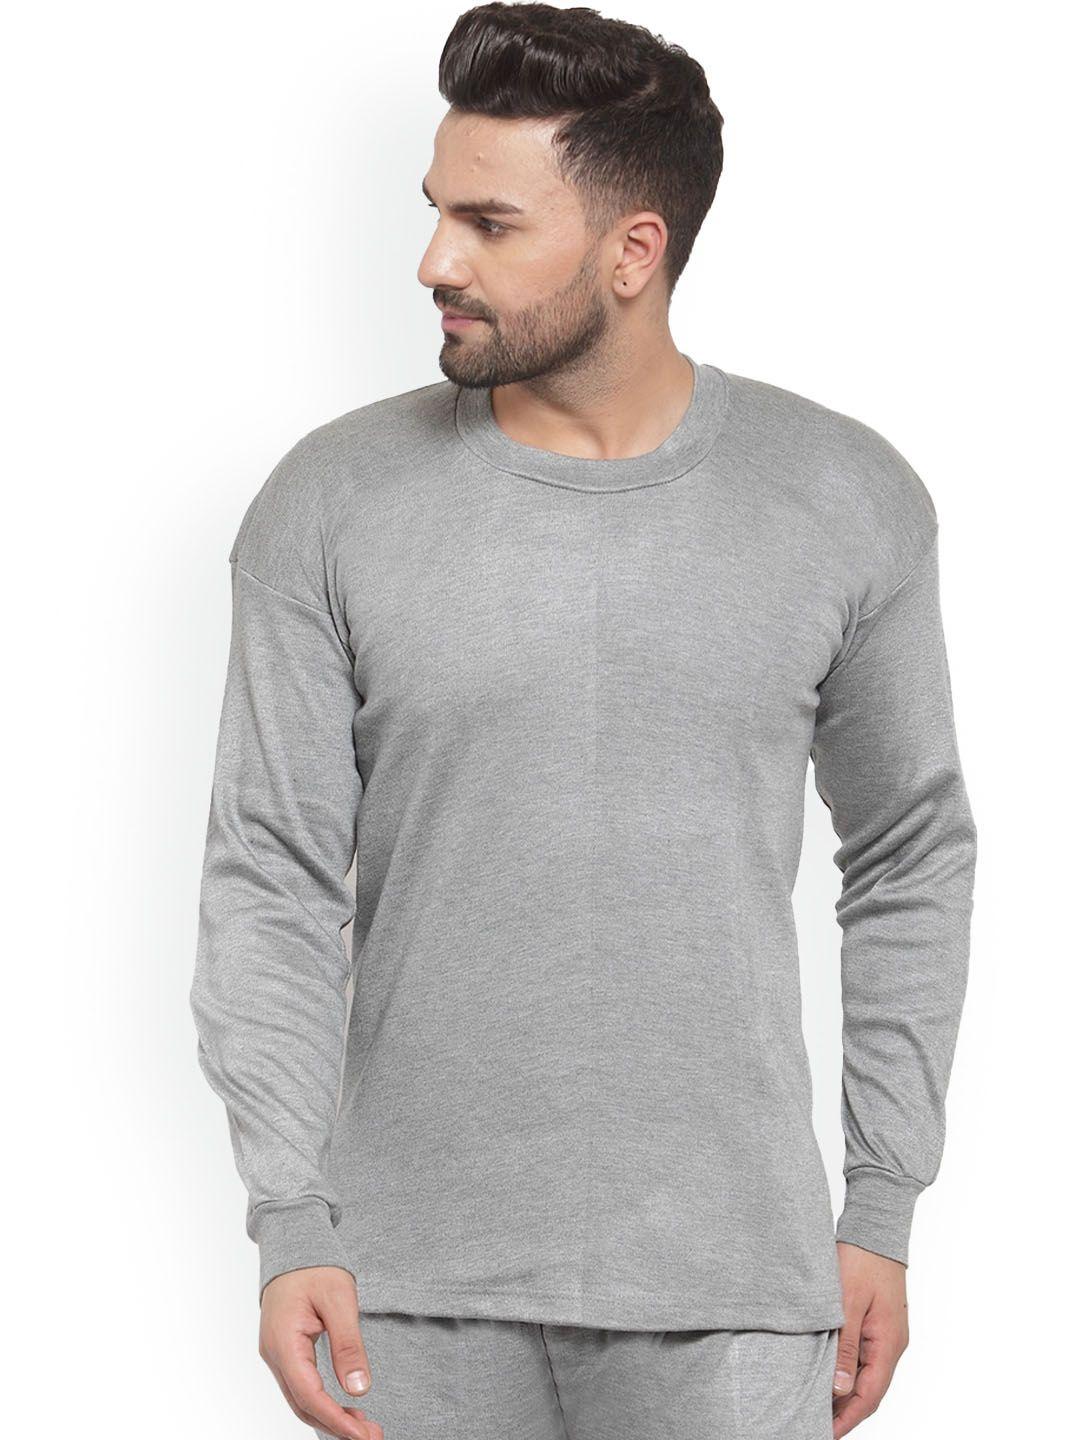 uzarus round neck long sleeves cotton thermal top